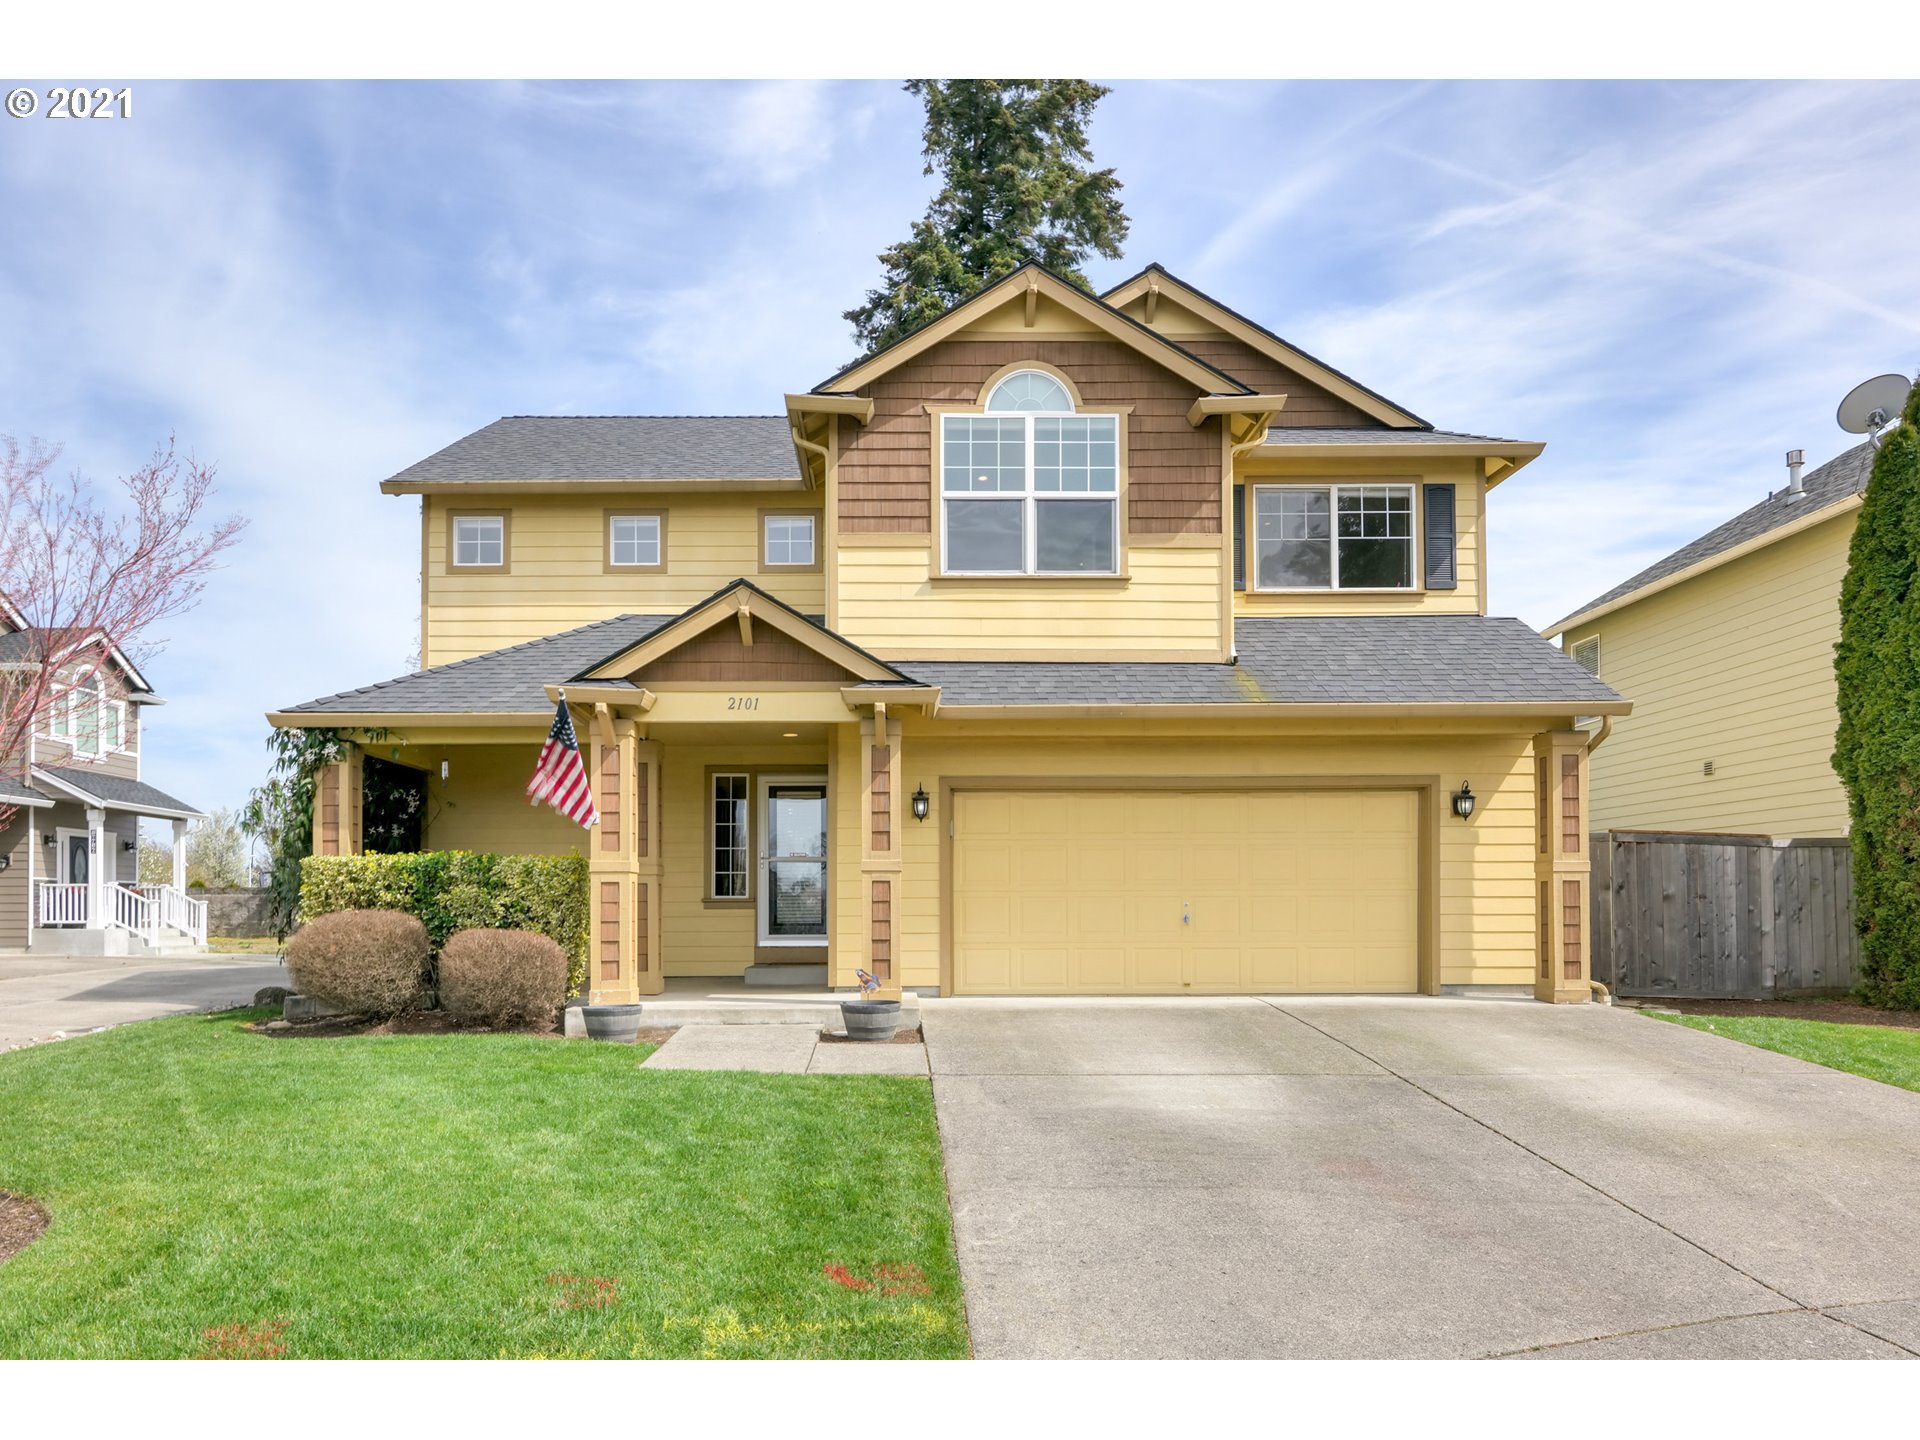 2101 SE 190TH AVE (1 of 17)